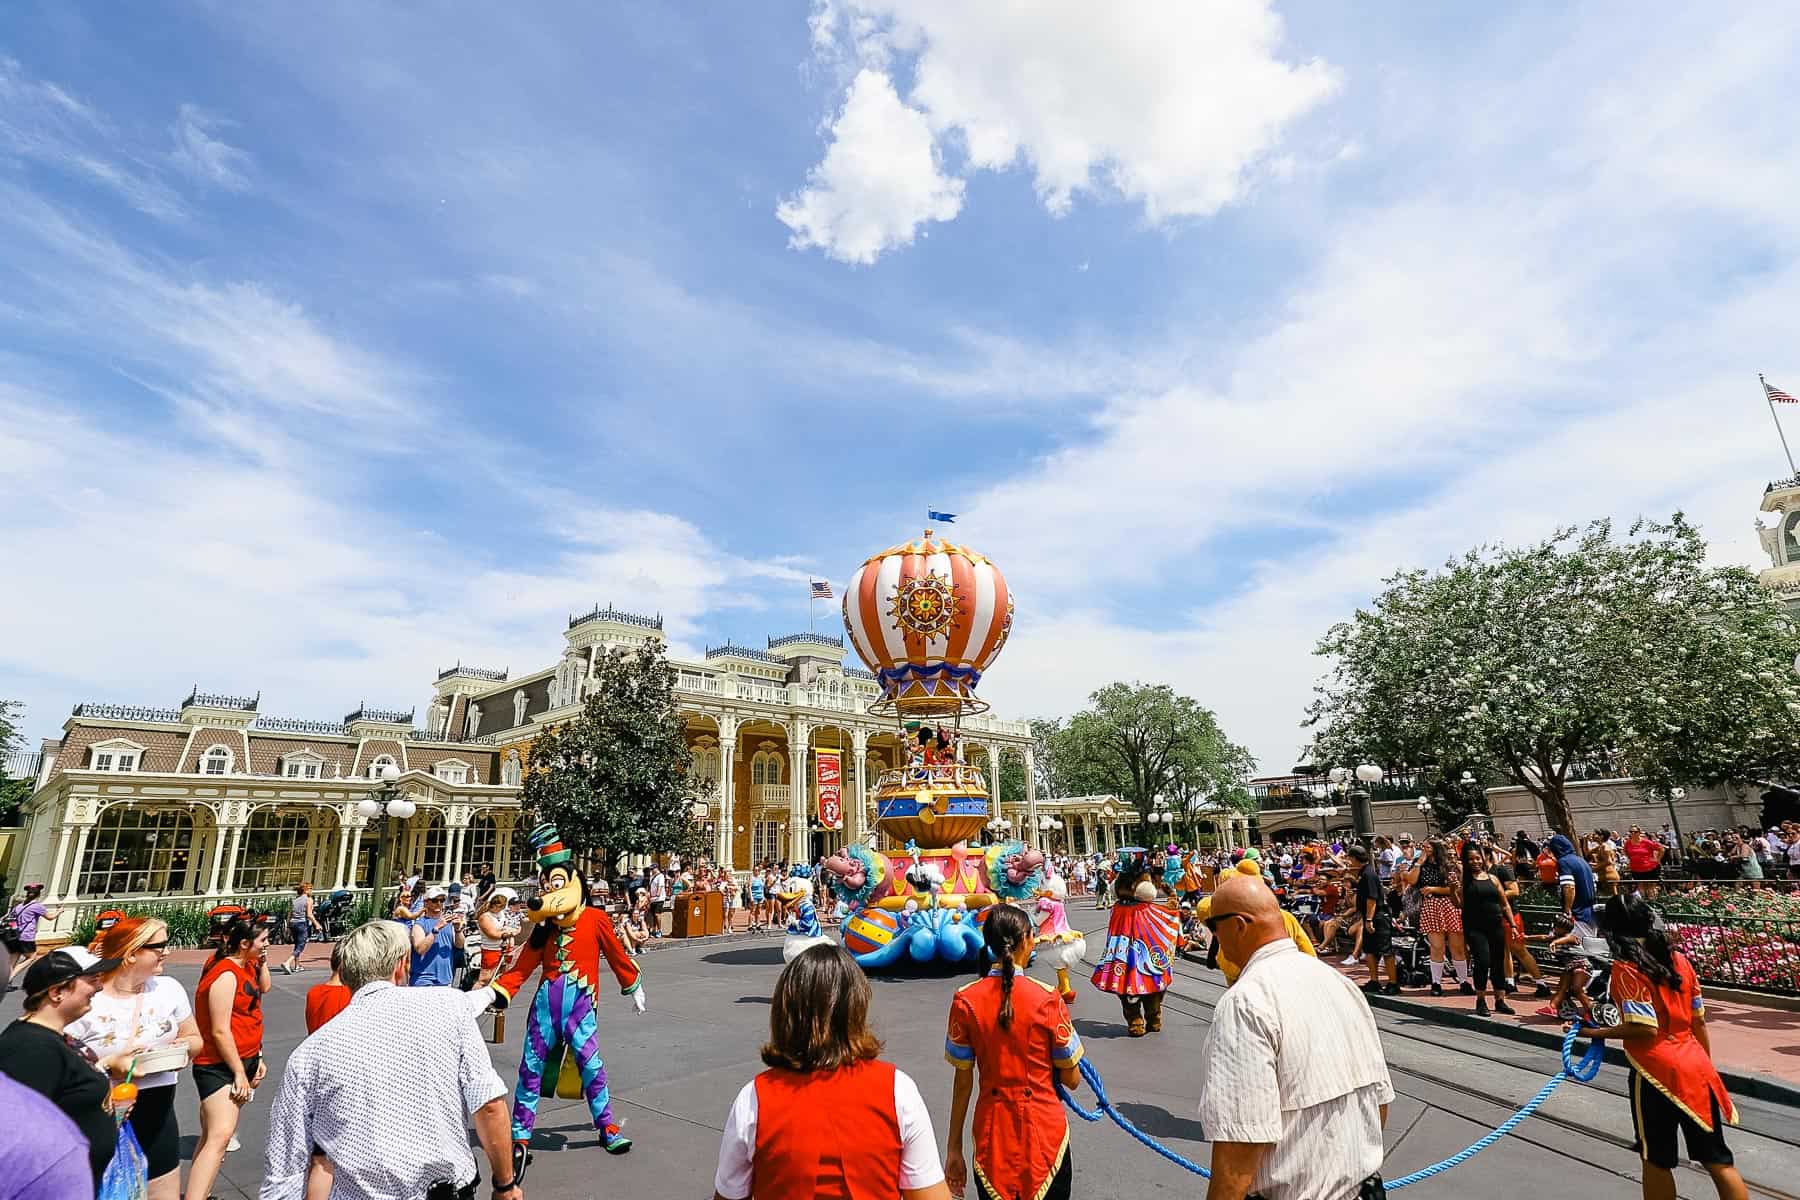 Cast members carry a rope at the end of the parade as it passes through Town Square. 